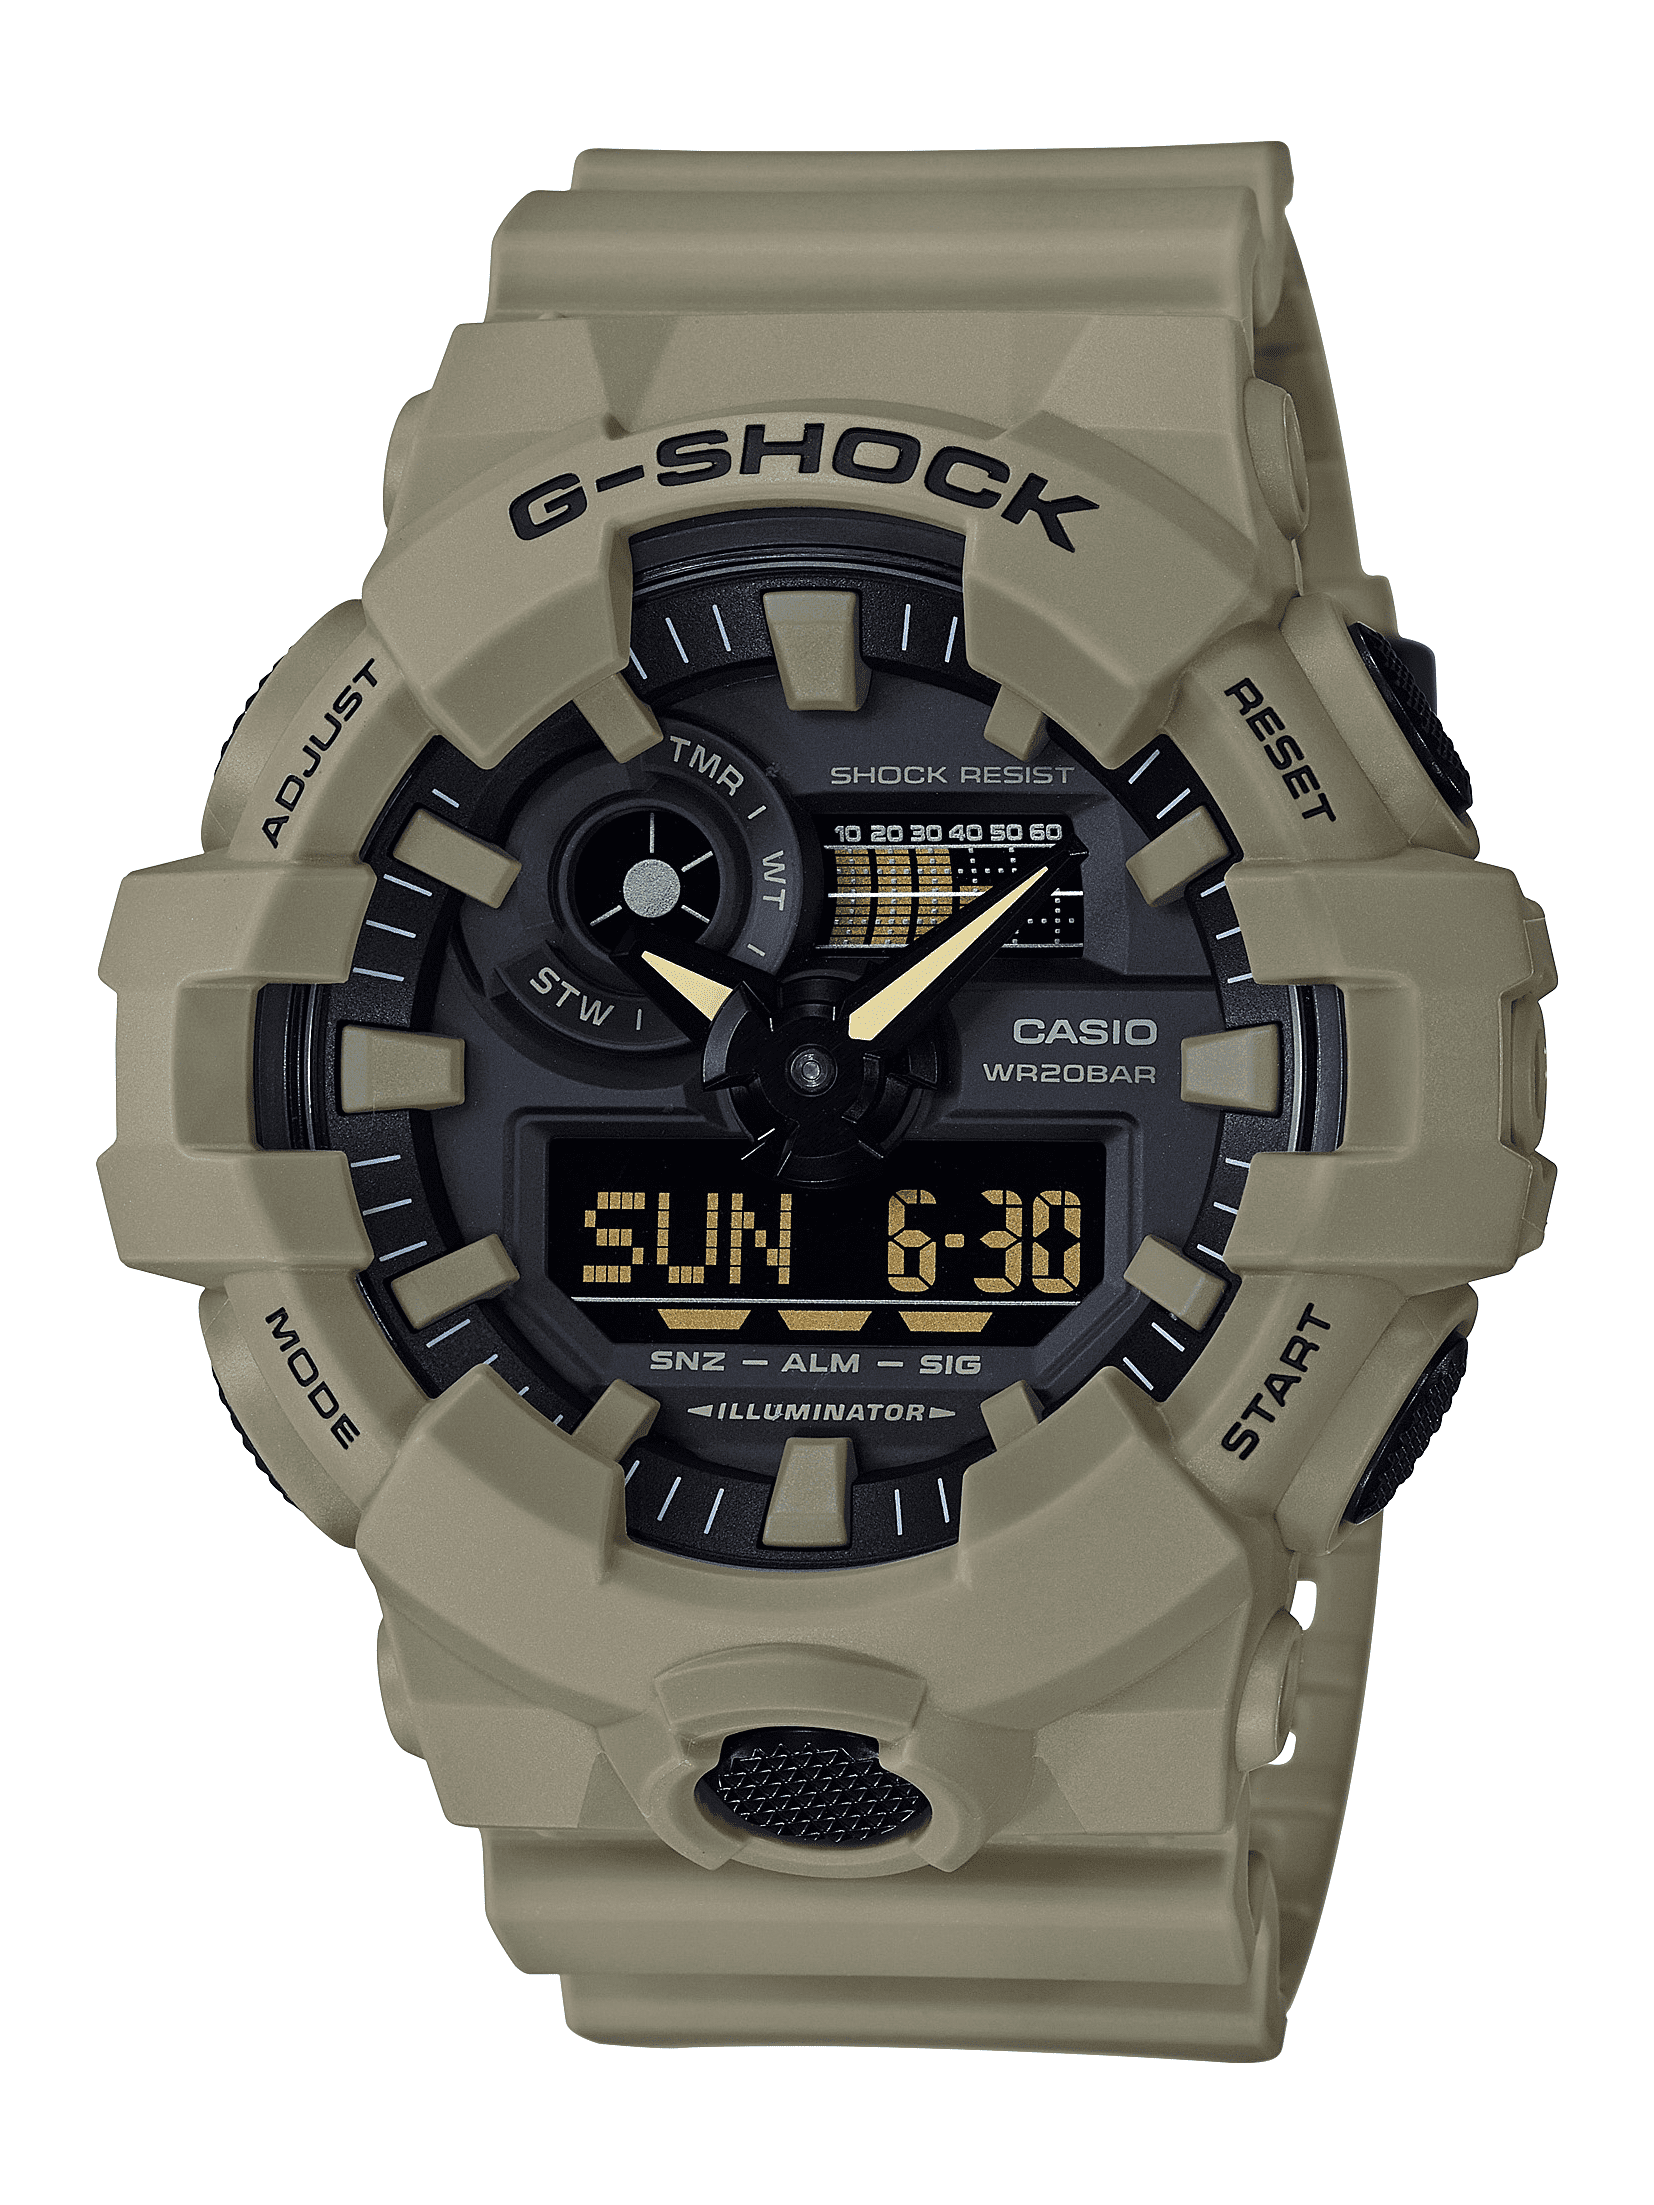 G-Shock Front Button Analog Digital Resin Watch (Beige) $51.23 + Free Shipping